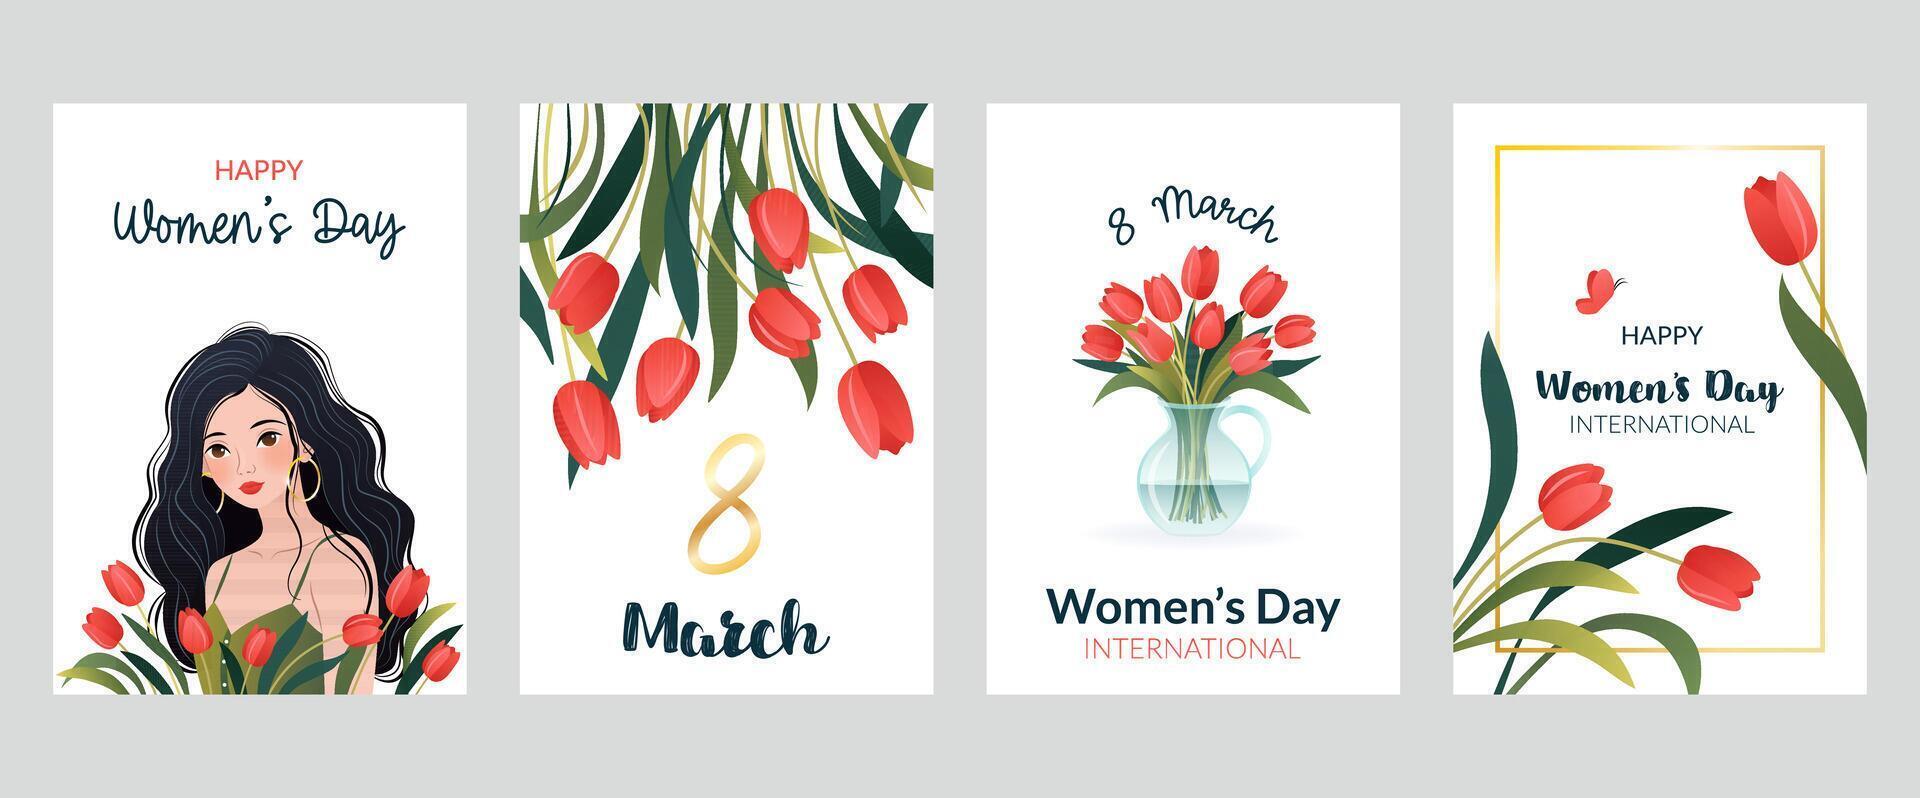 International Women's Day vertical posters, banners set. 8 March. Cartoon woman, tulips, bouquet of flowers in vase. Design for campaign, social media post, postcard, promo. Vector illustrations.